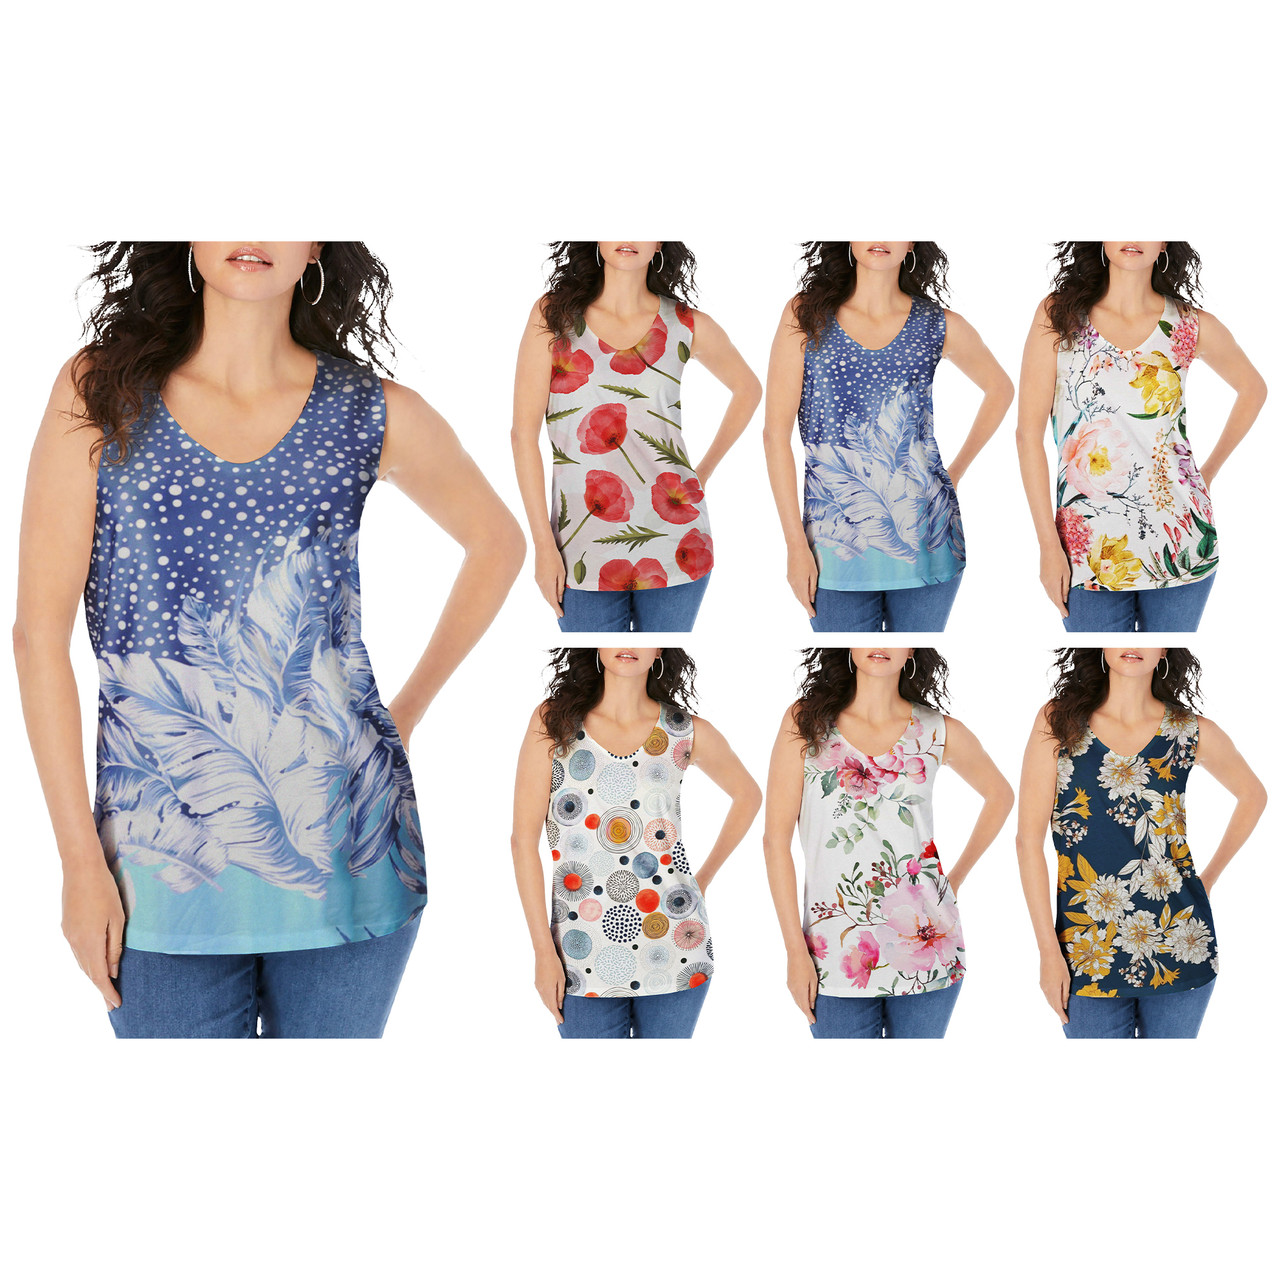 Women's Sleeveless Floral Print V-Neck Blouse (4-Pack) product image